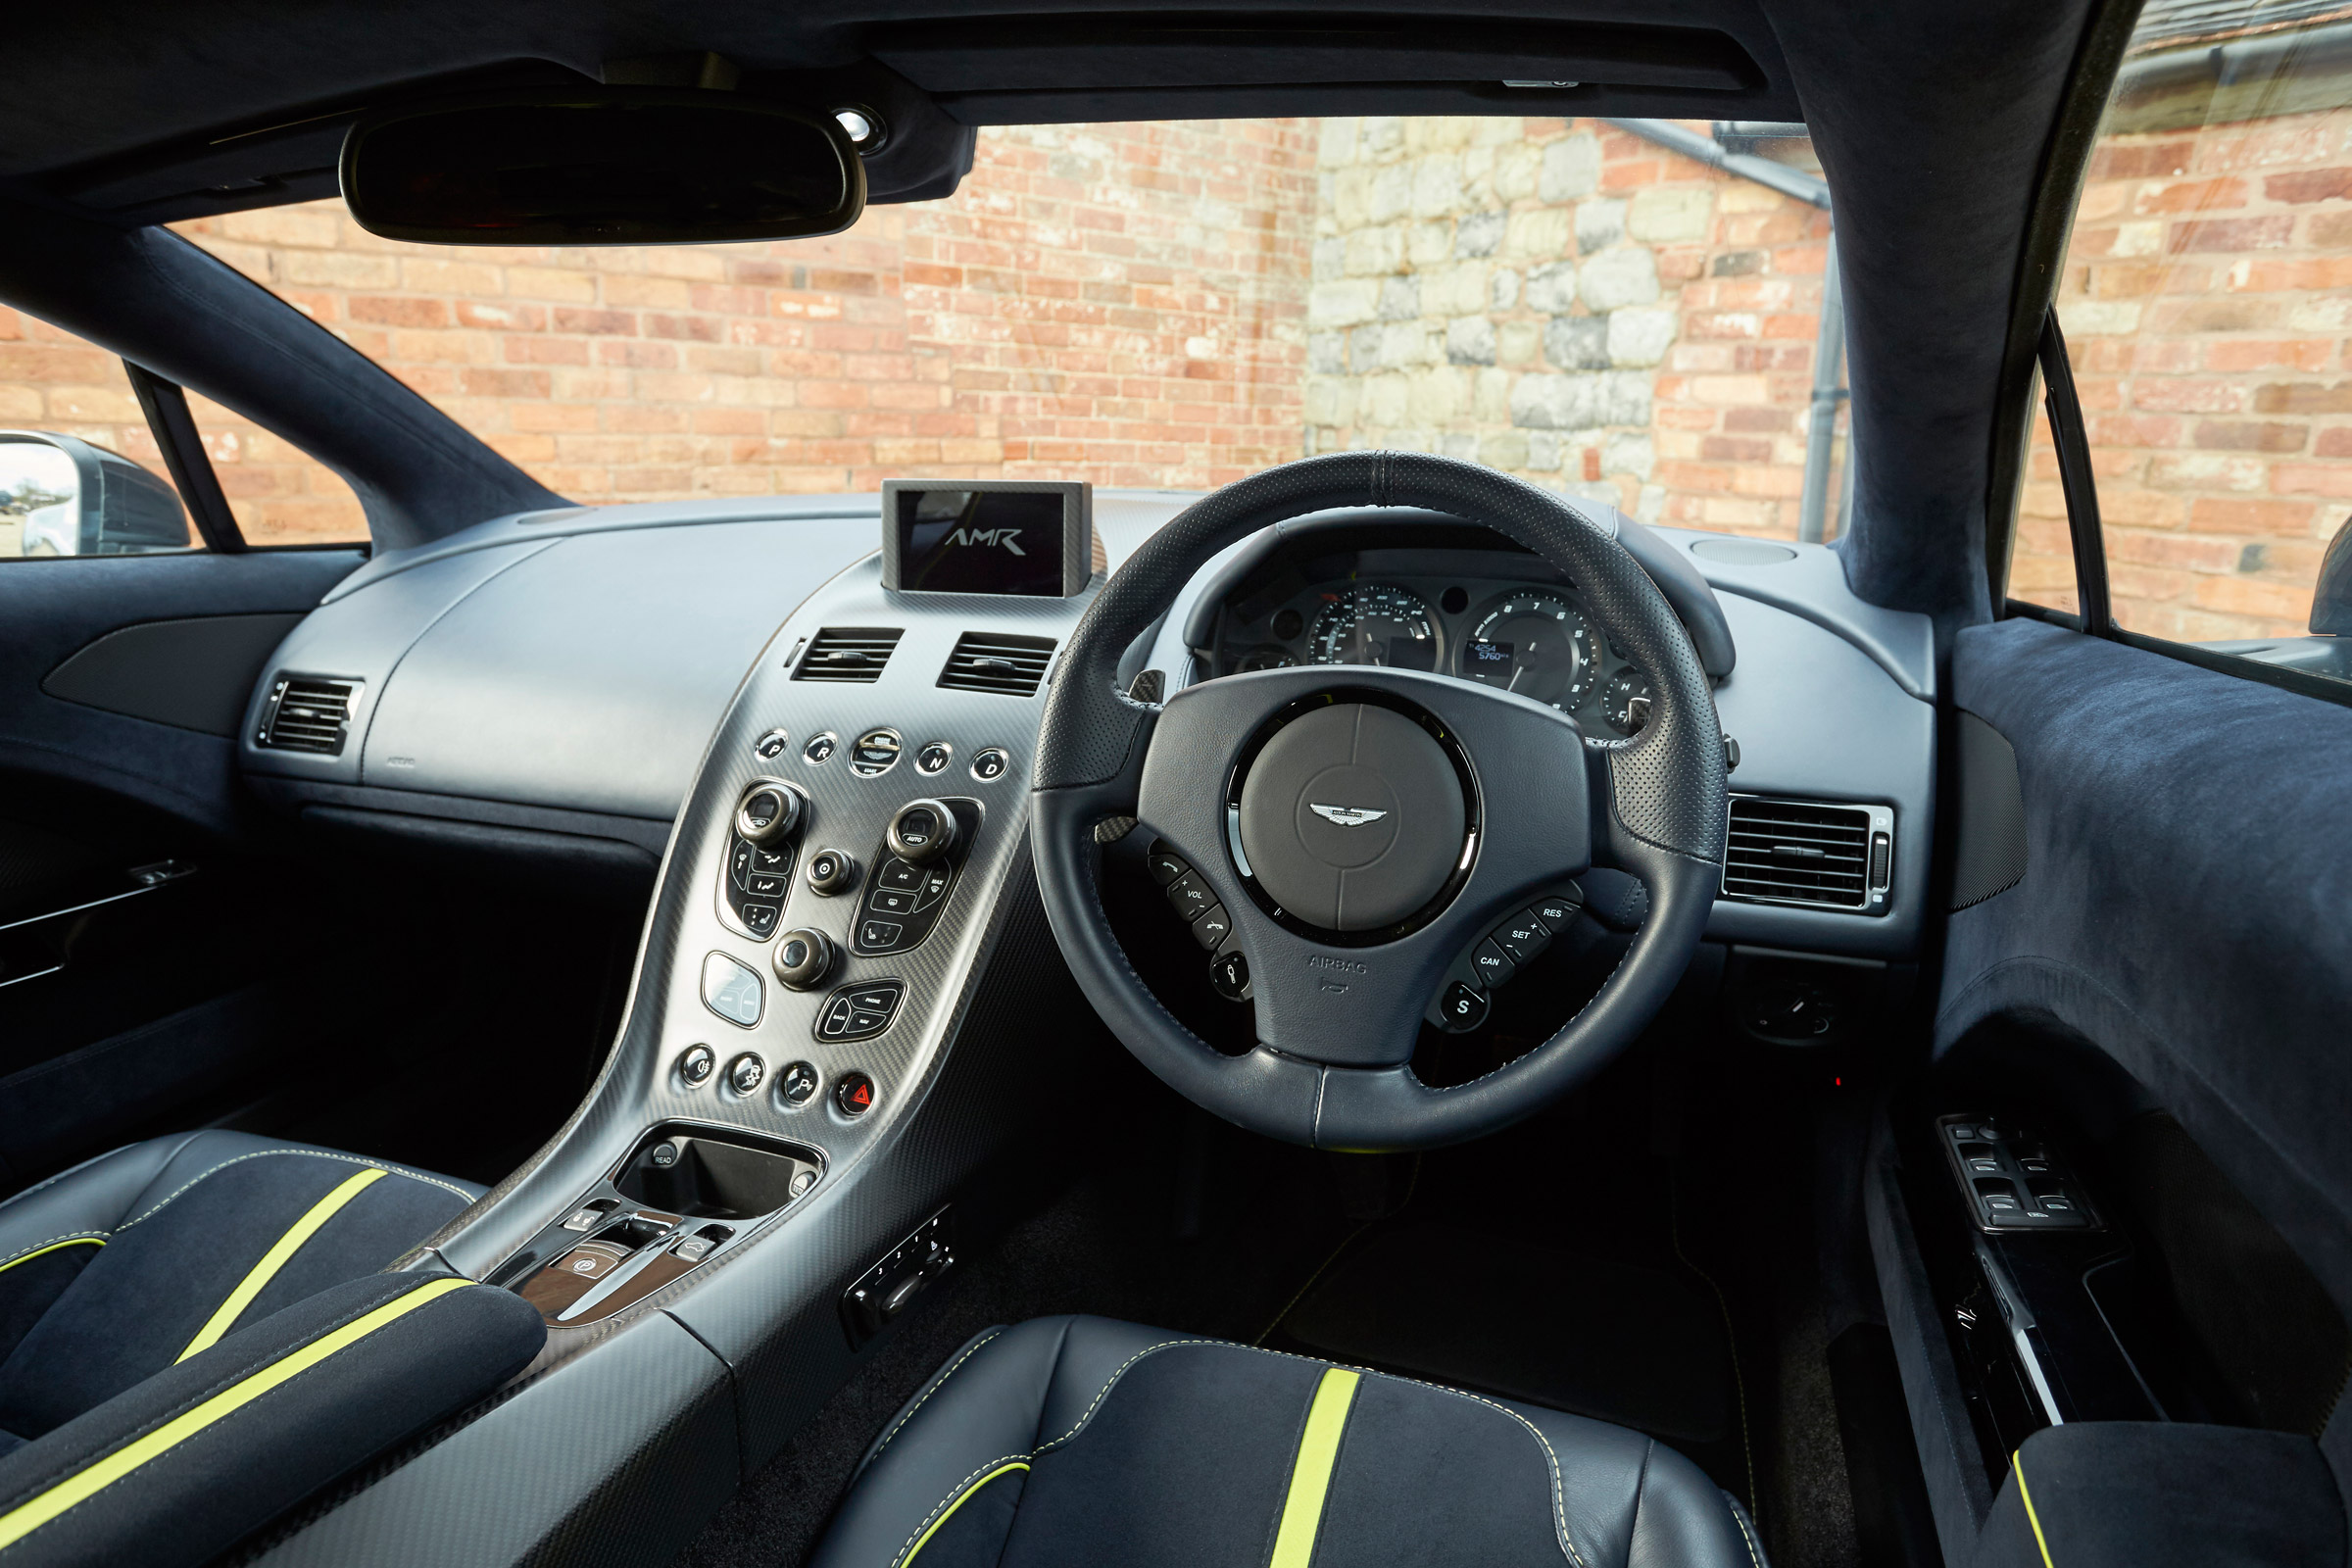 Aston Martin Rapide Amr Review 595bhp Swansong For Porsche